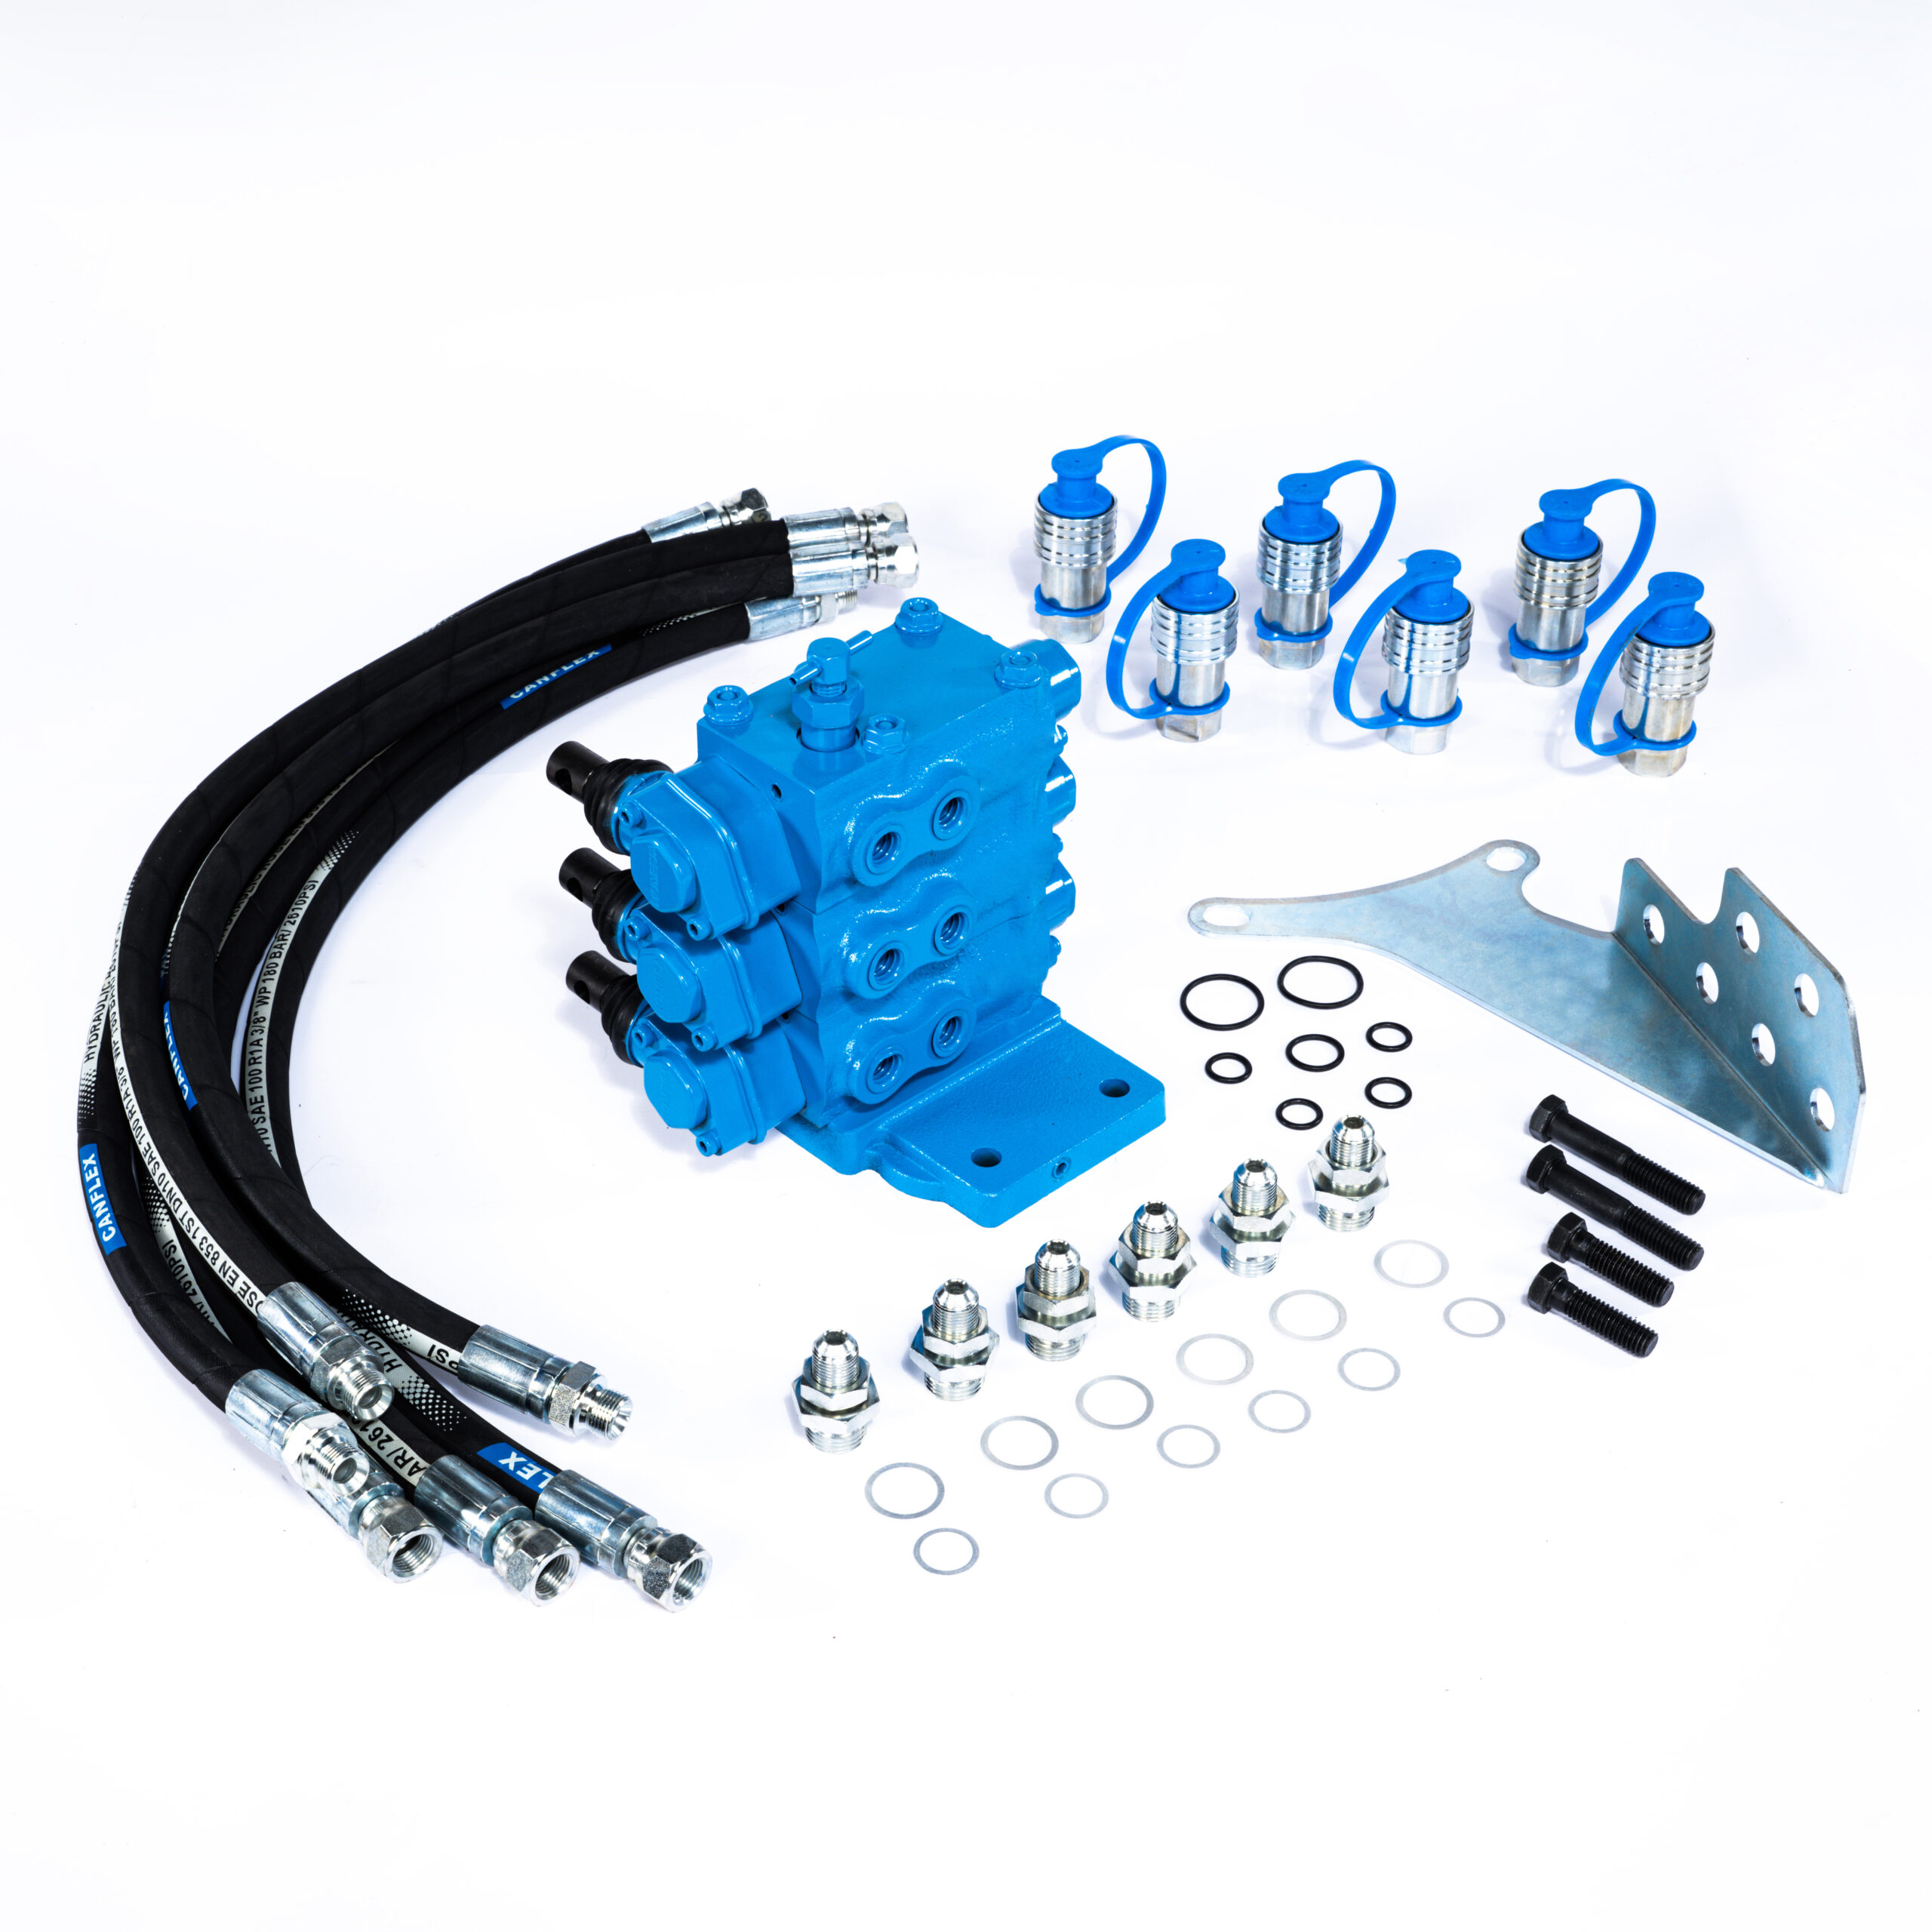 Kit Distributeur Hydraulique FORD 6 sorties 3 DOUBLES EFFETS TRANSFORMABLE EN SIMPLE EFFET FORD 2000 2600 3000 -3x dw